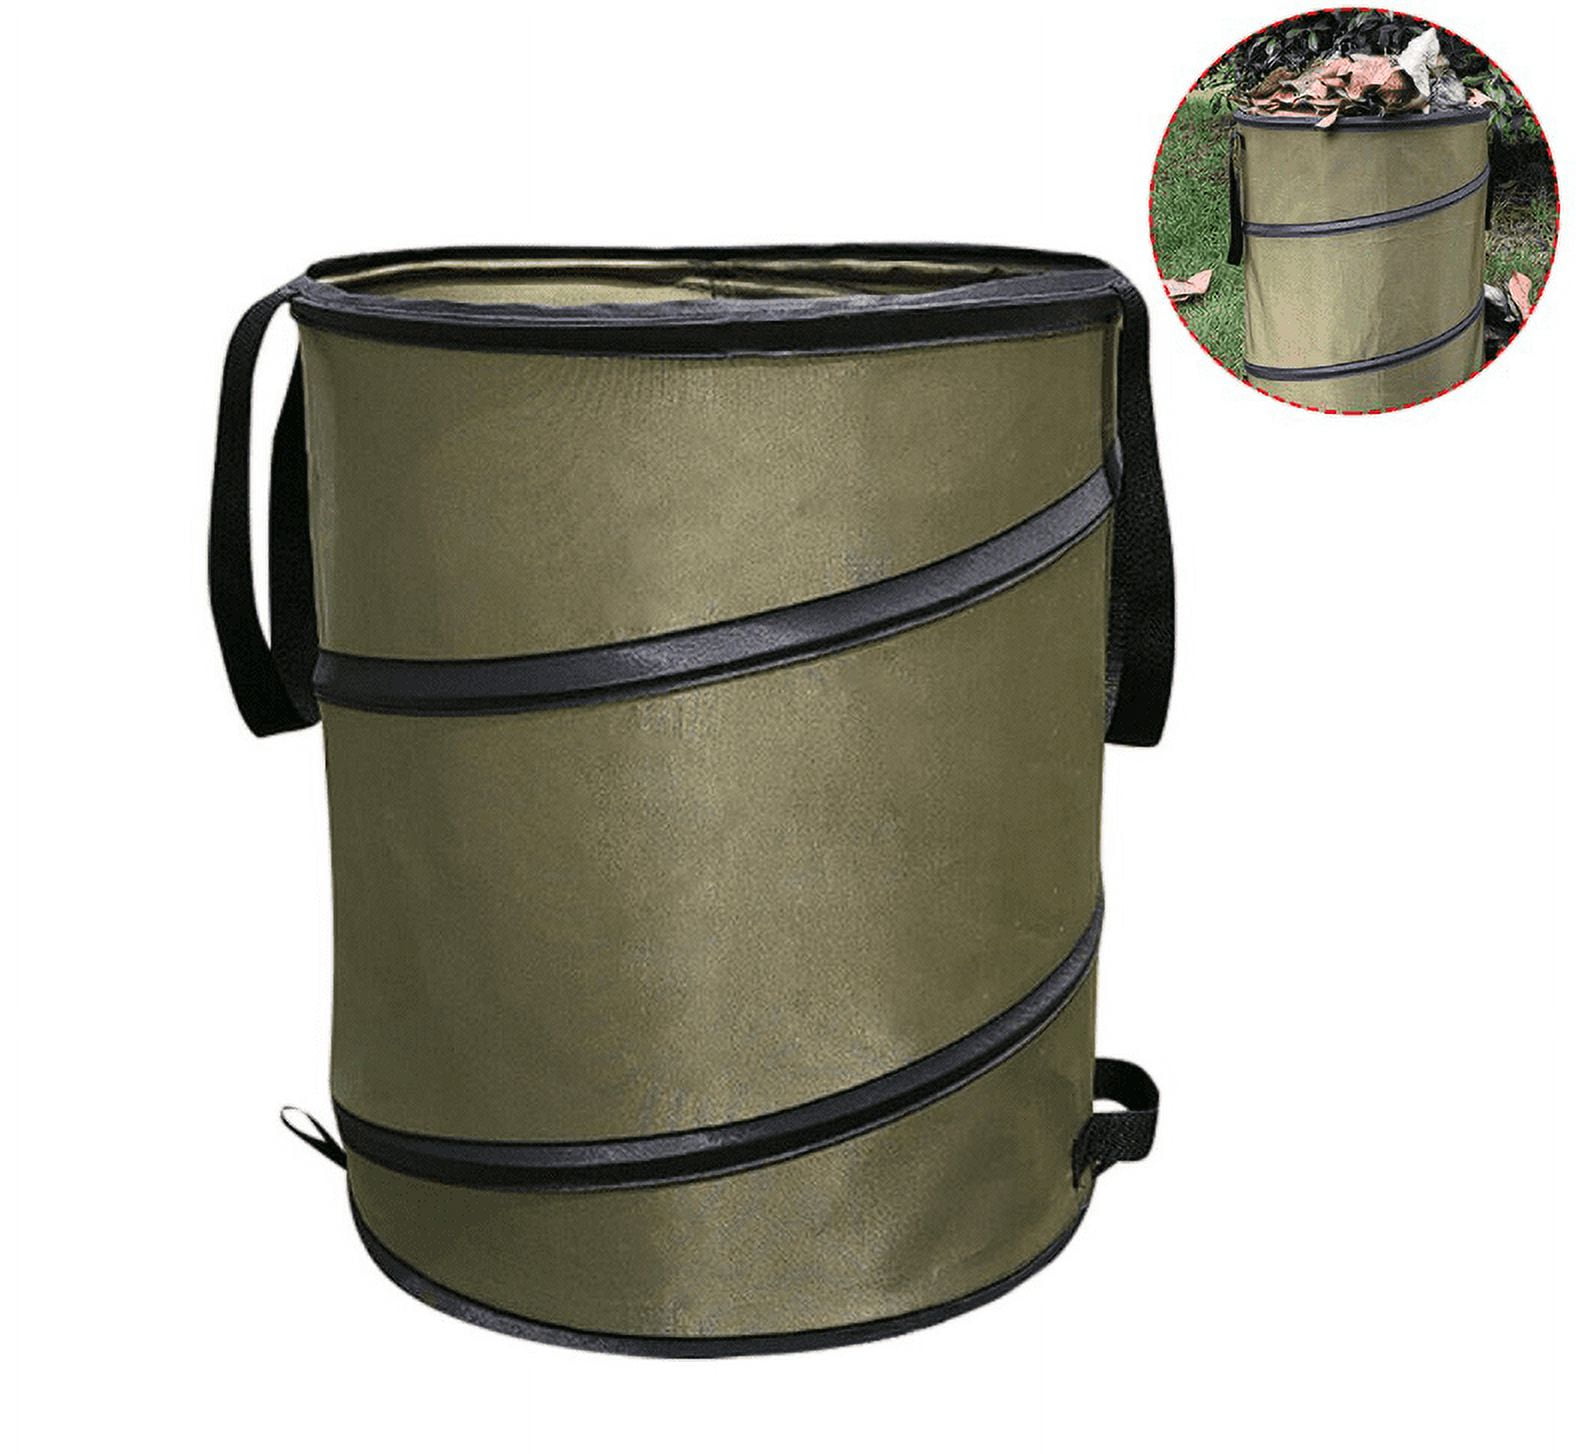 YOUTHINK Collapsible Trash Can, 30 Gallon Oxford Cloth Recycling